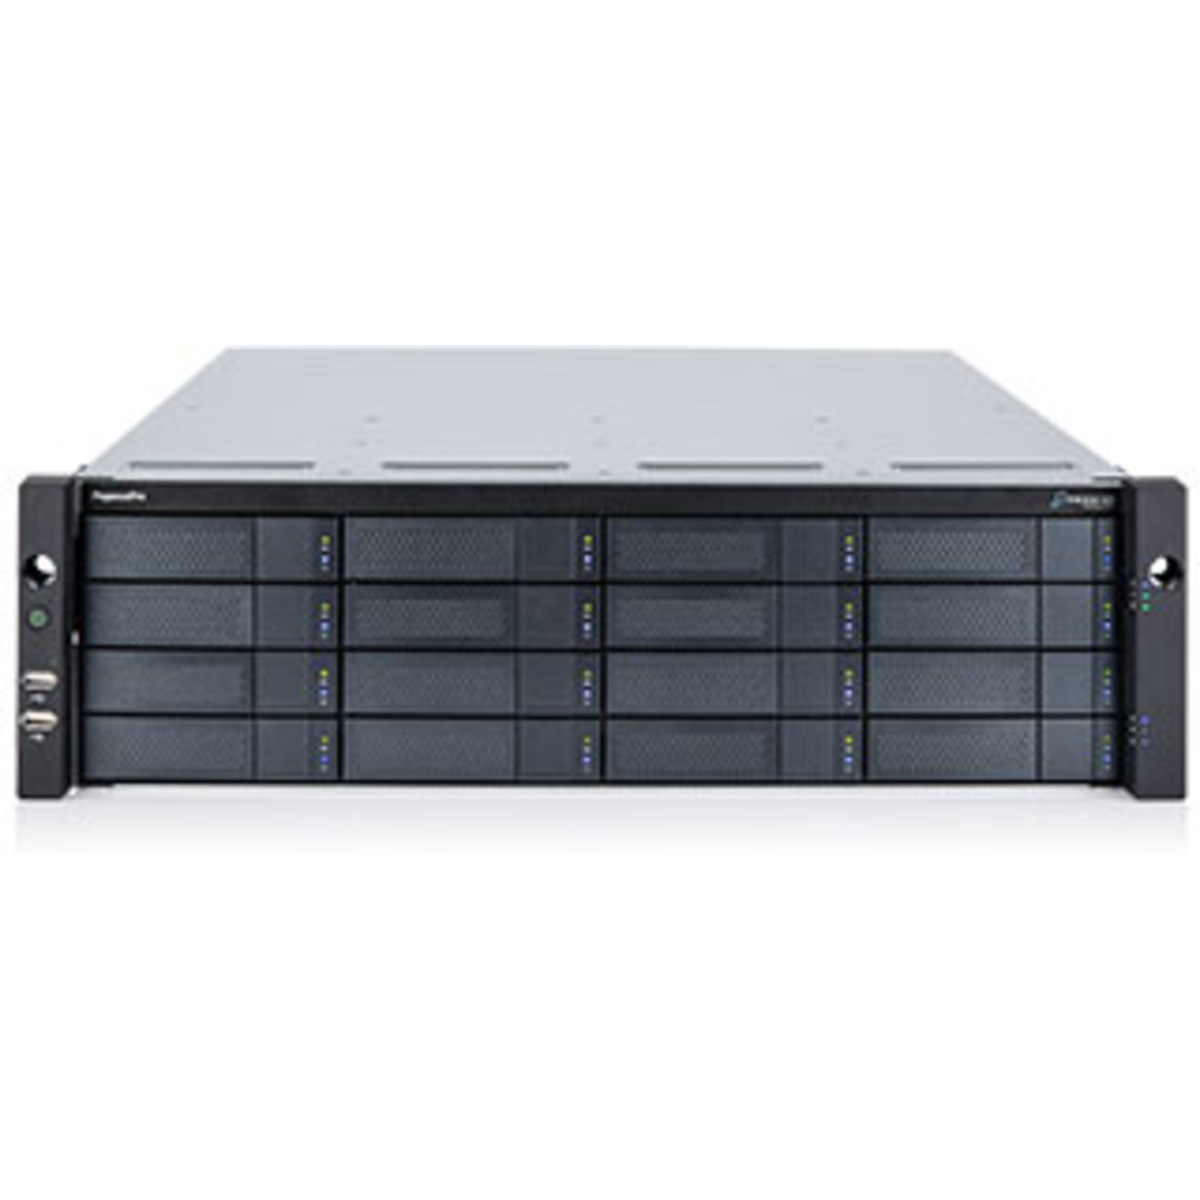 Promise Technology PegasusPro R16 32tb 16-Bay RackMount Multimedia / Power User / Business DAS-NAS - Combo Direct + Network Storage Device 16x2tb Crucial MX500 CT2000MX500SSD1 2.5 560/510MB/s SATA 6Gb/s SSD CONSUMER Class Drives Installed - Burn-In Tested PegasusPro R16